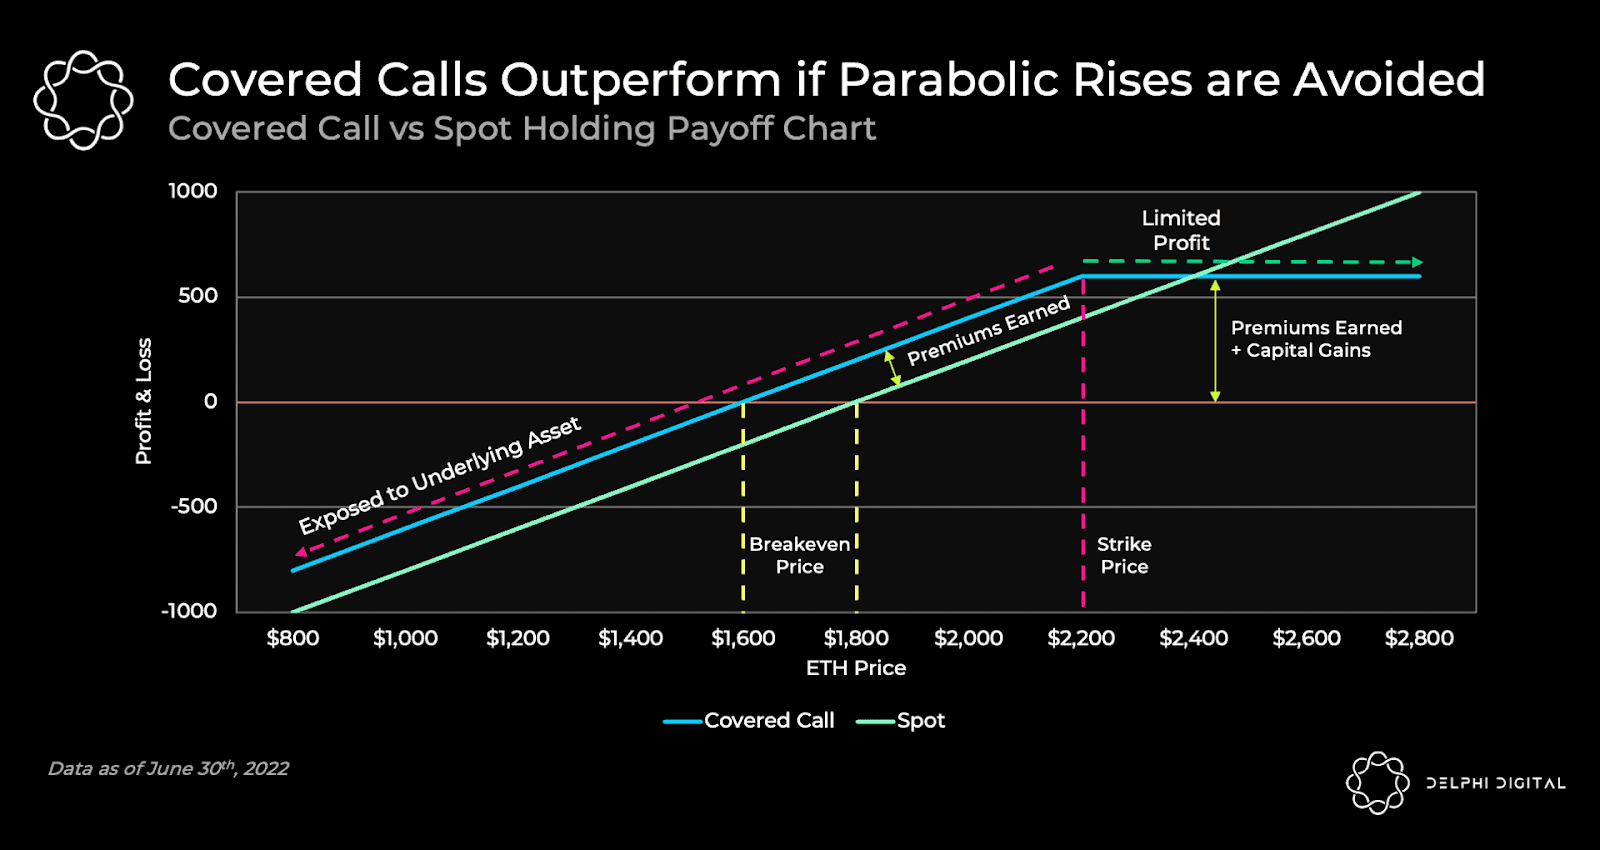 Covered Calls Outperform